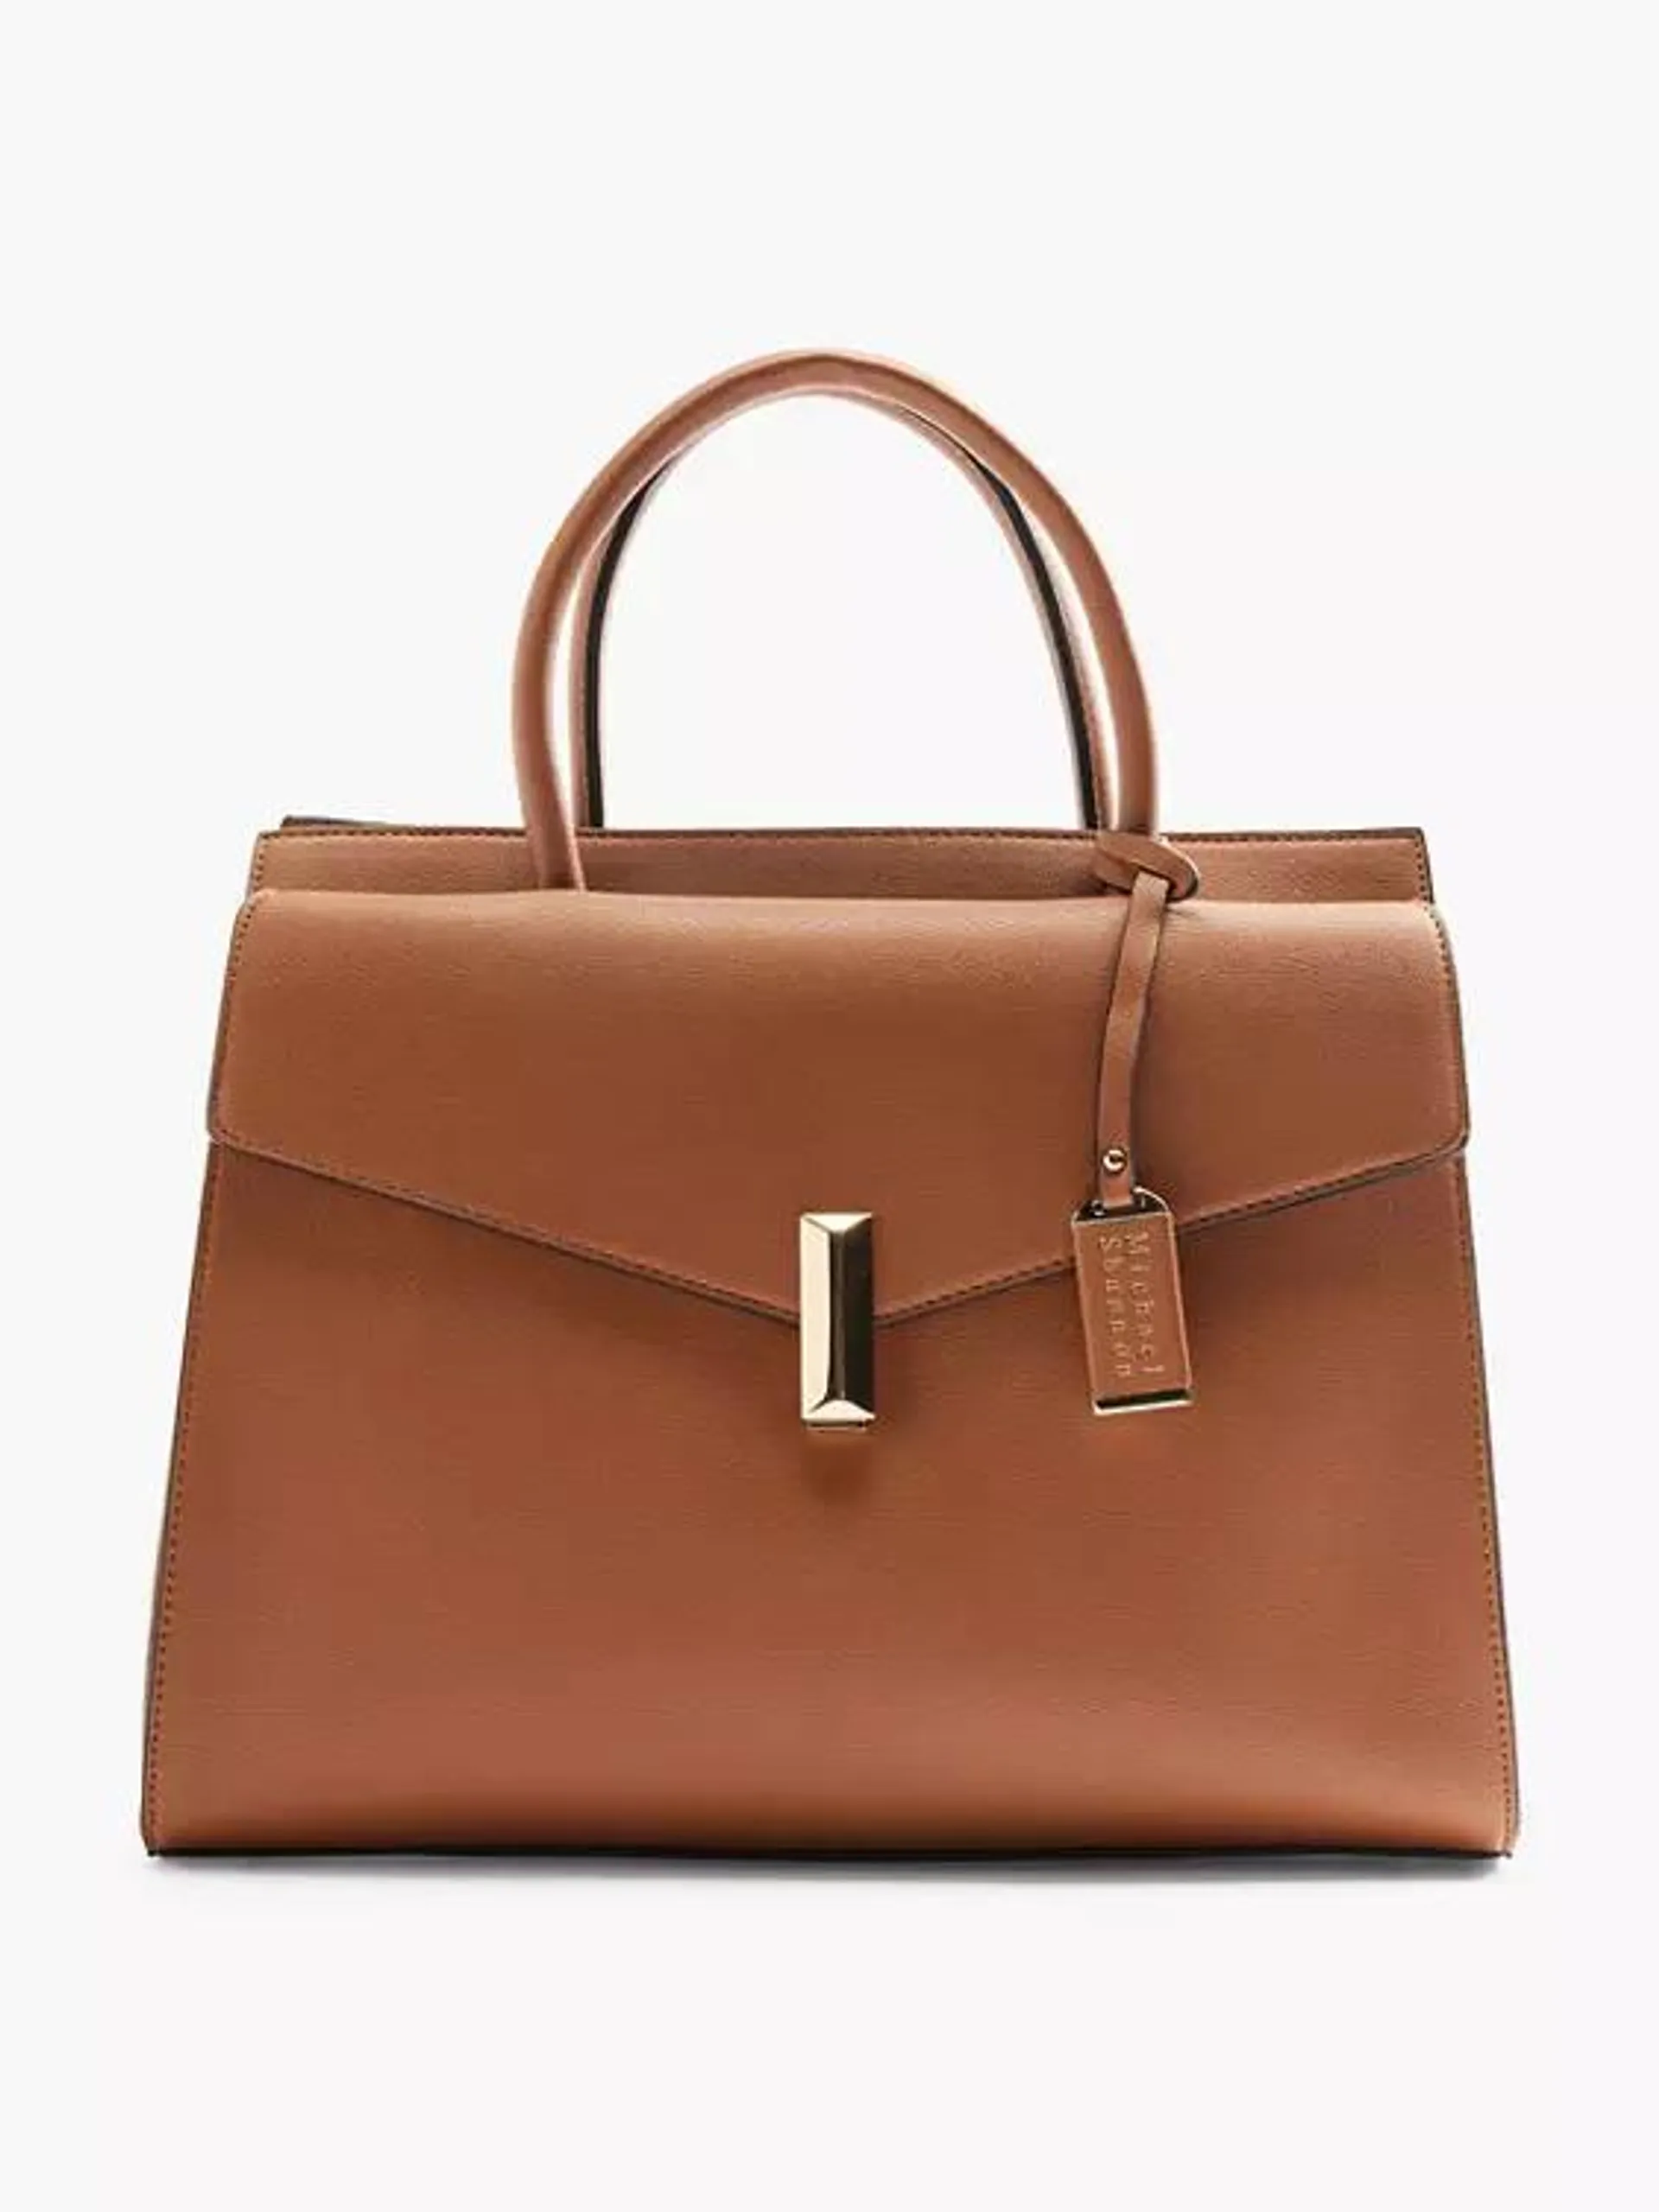 Brown Tote with Bag Charm